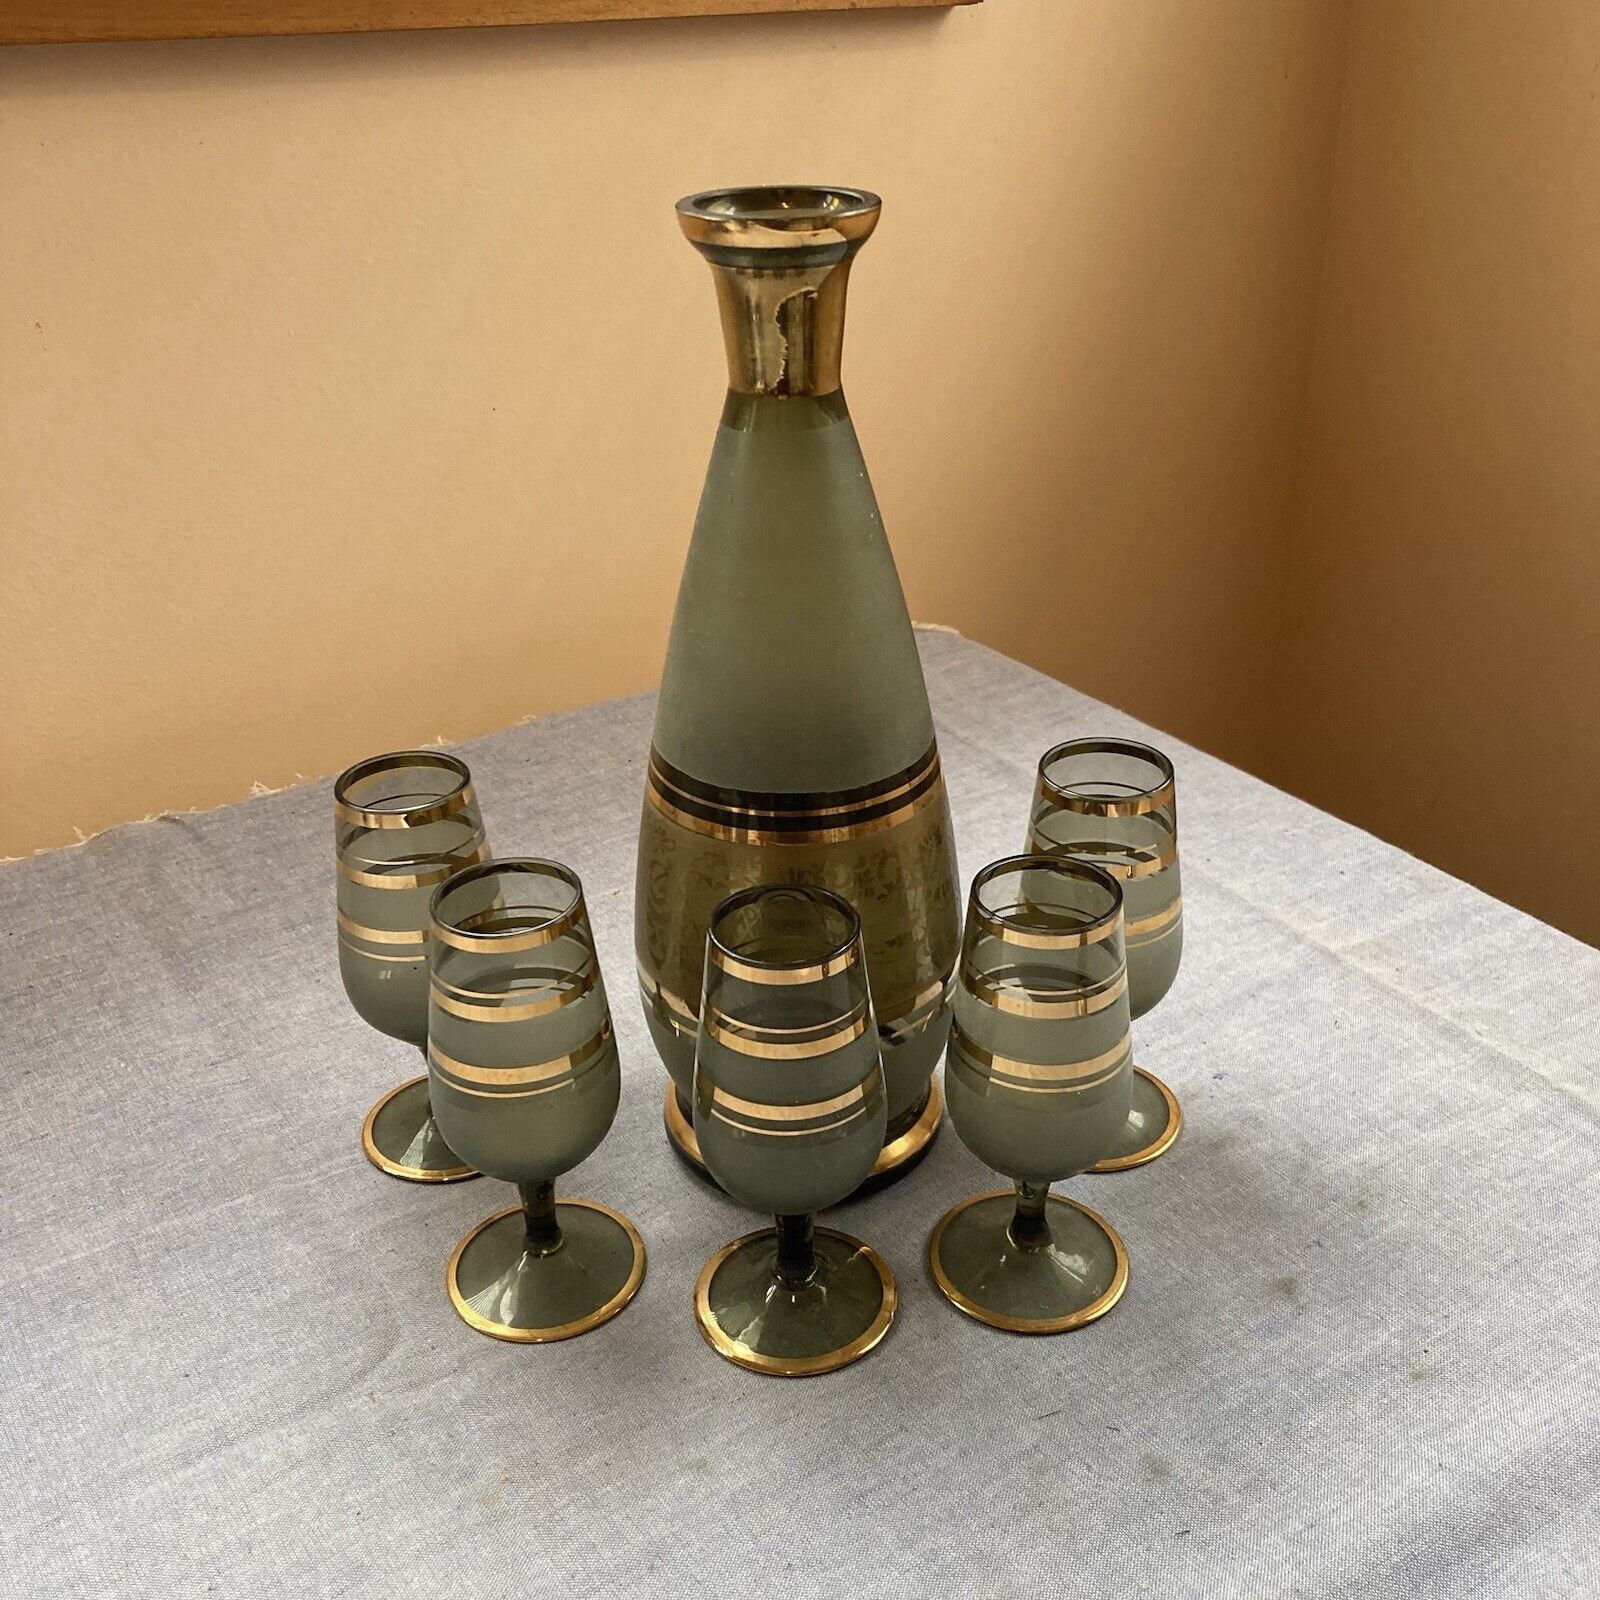 Vintage Frosted Smoke With Gold Accents Decanter w/5 Matching Glasses No Stopper